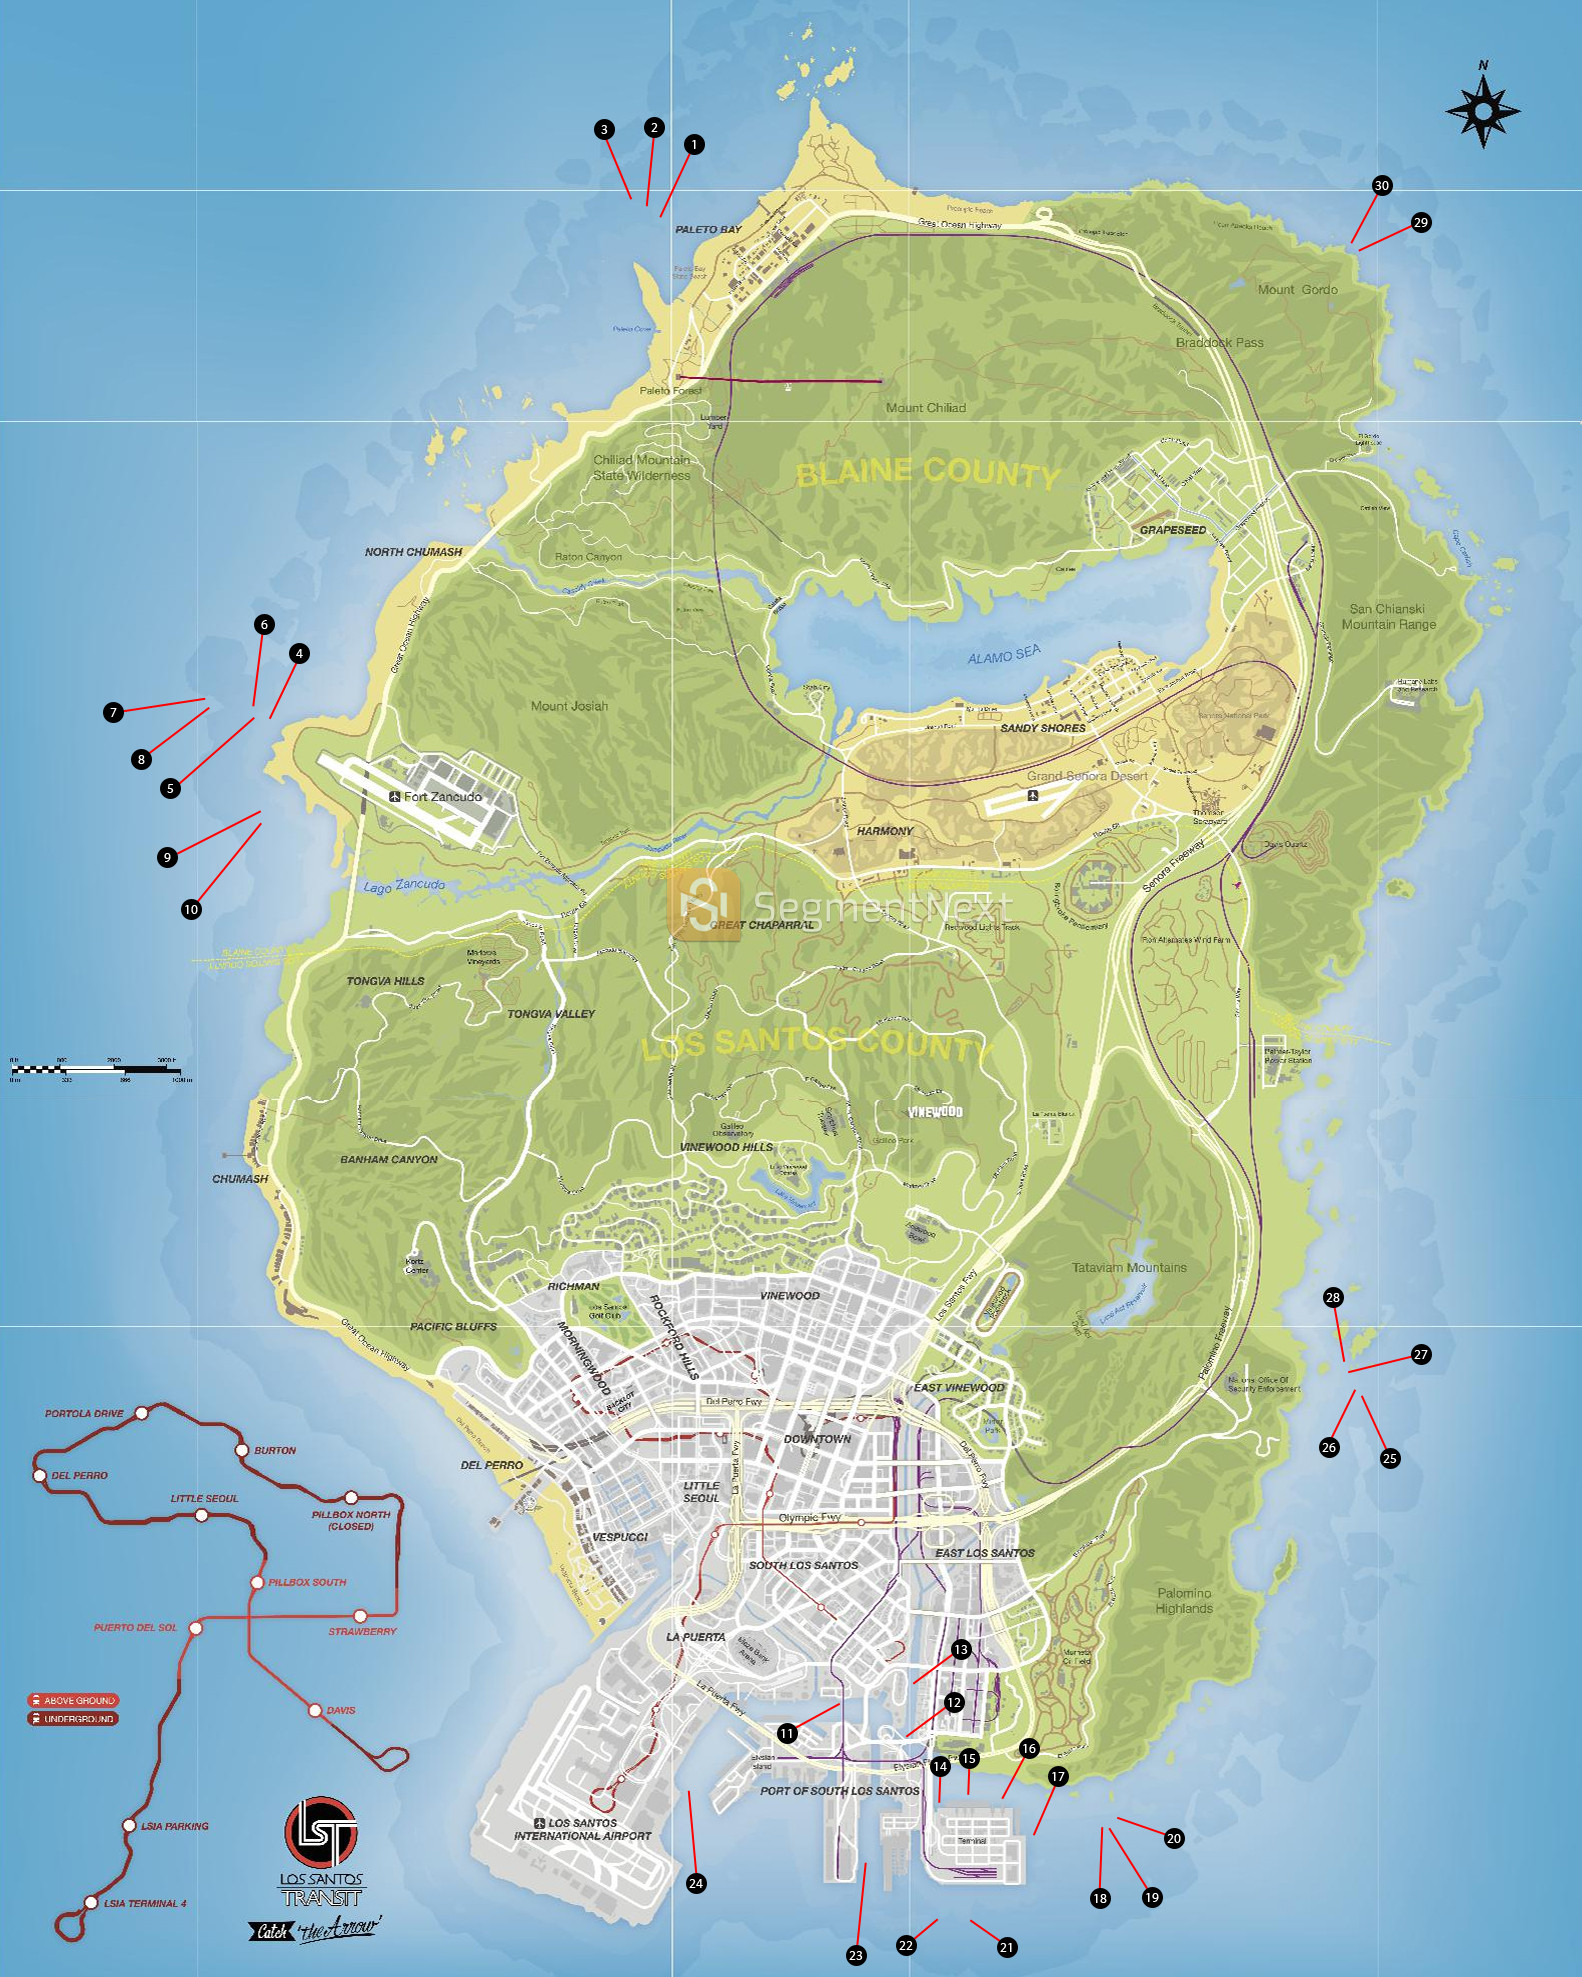 Gta V Printable Map New Steam Munity Guide Maps And Collectibles Locations